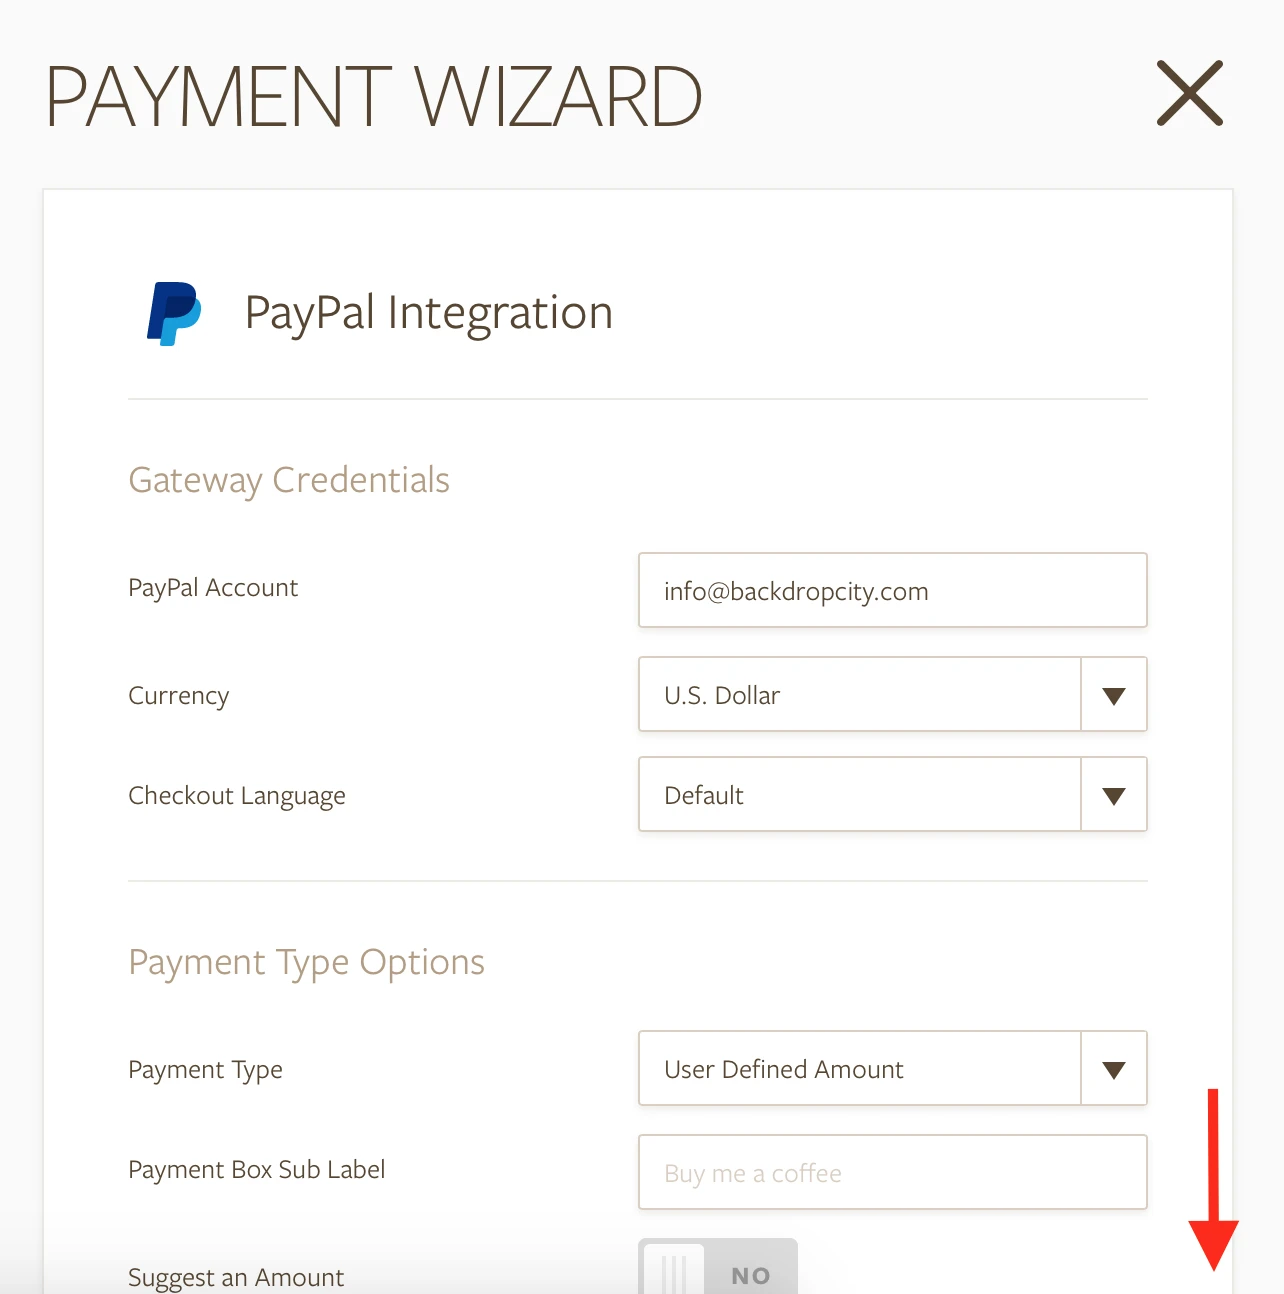 How can I pass the calculation value to payment field? Image 3 Screenshot 72